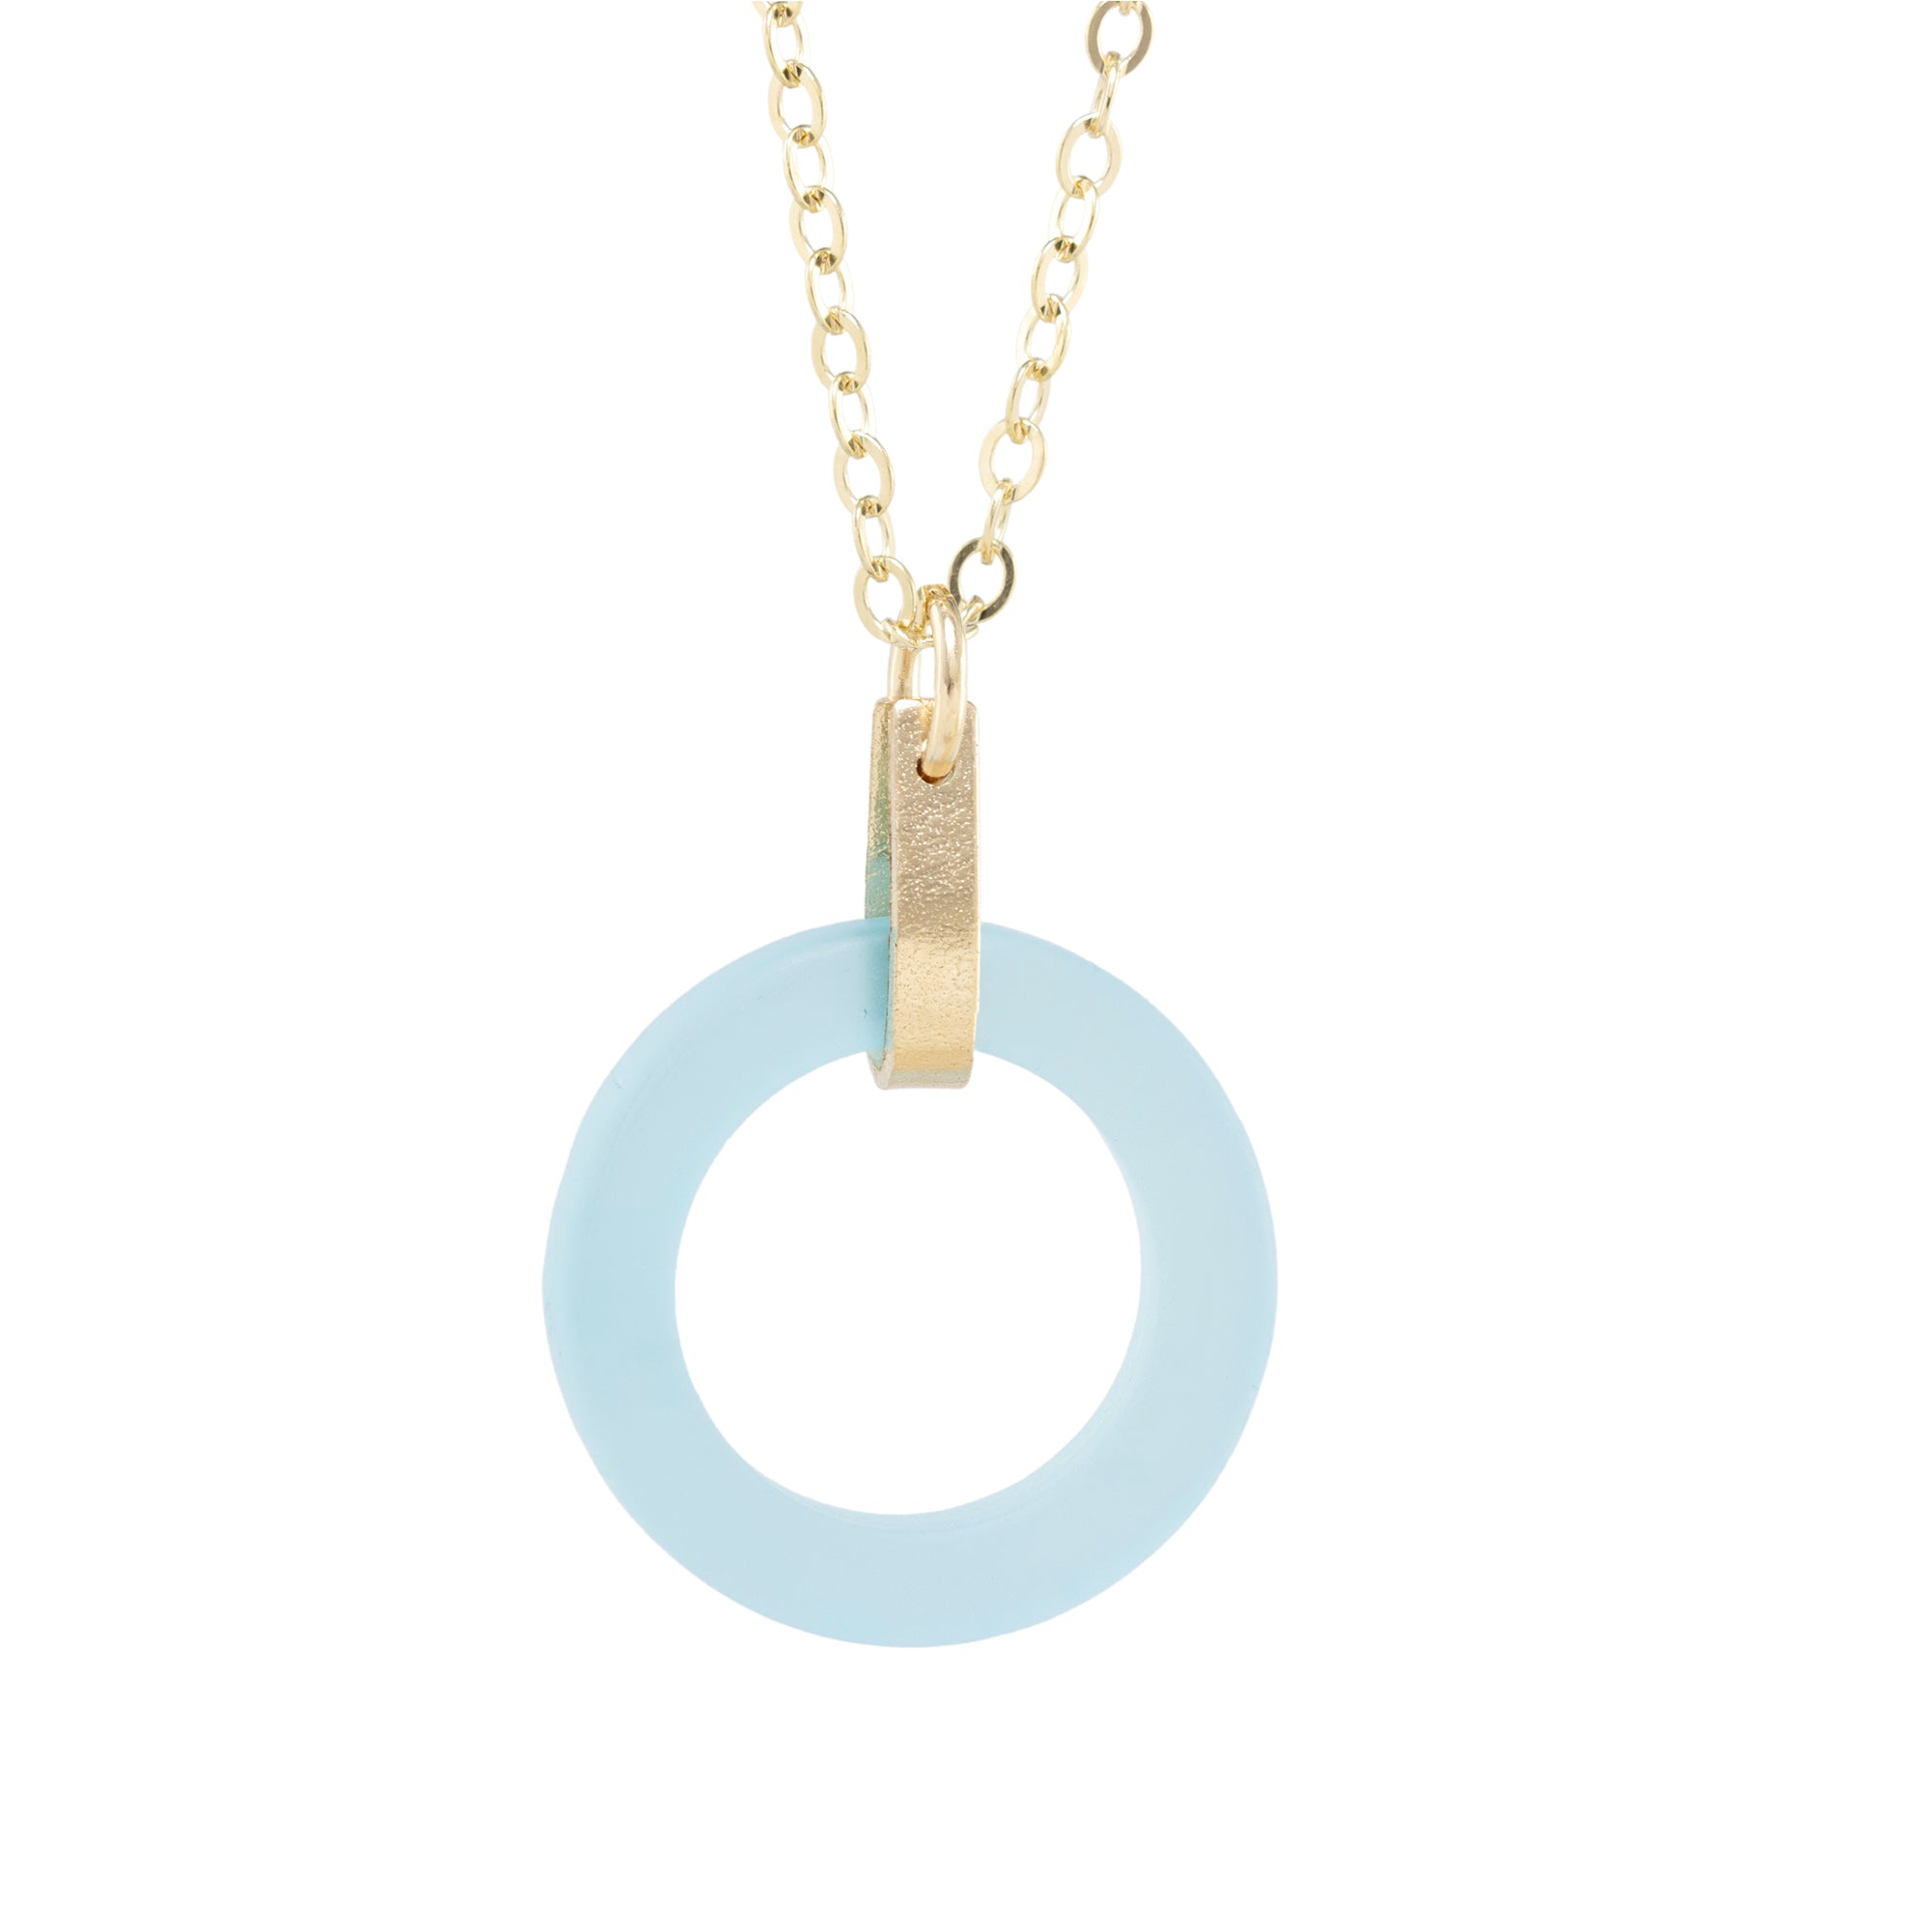 Light Baby Blue Round Recycled Glass Open Circle and 14K Gold Fill Strap Style Pendant Necklace